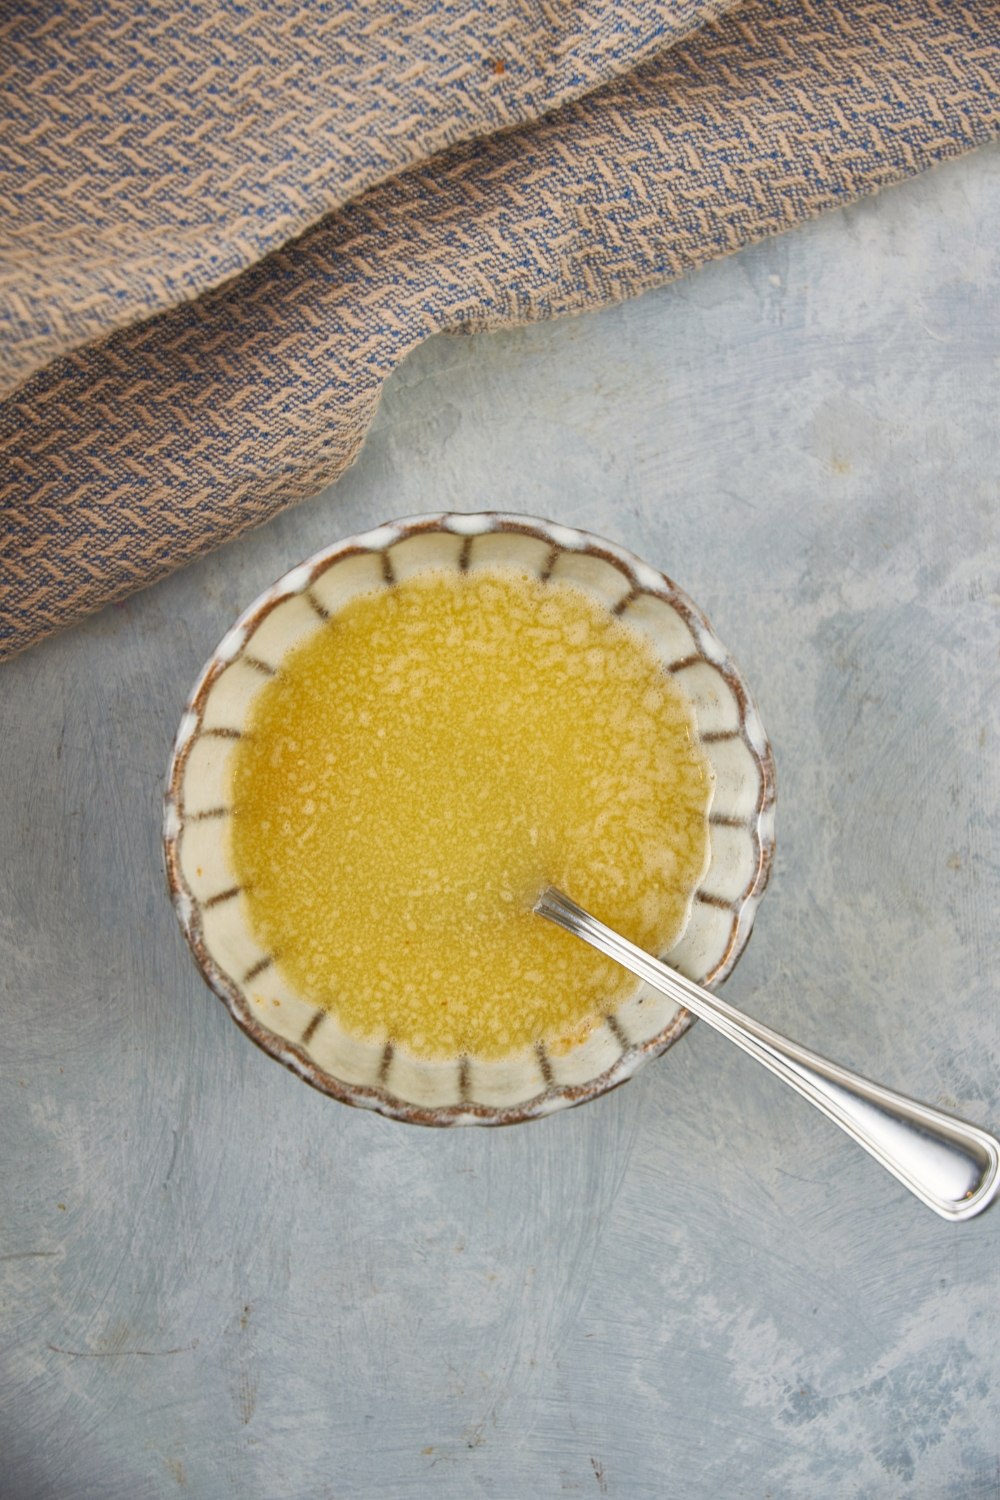 A decorative bowl with melted butter, garlic powder, and a spoon in it.